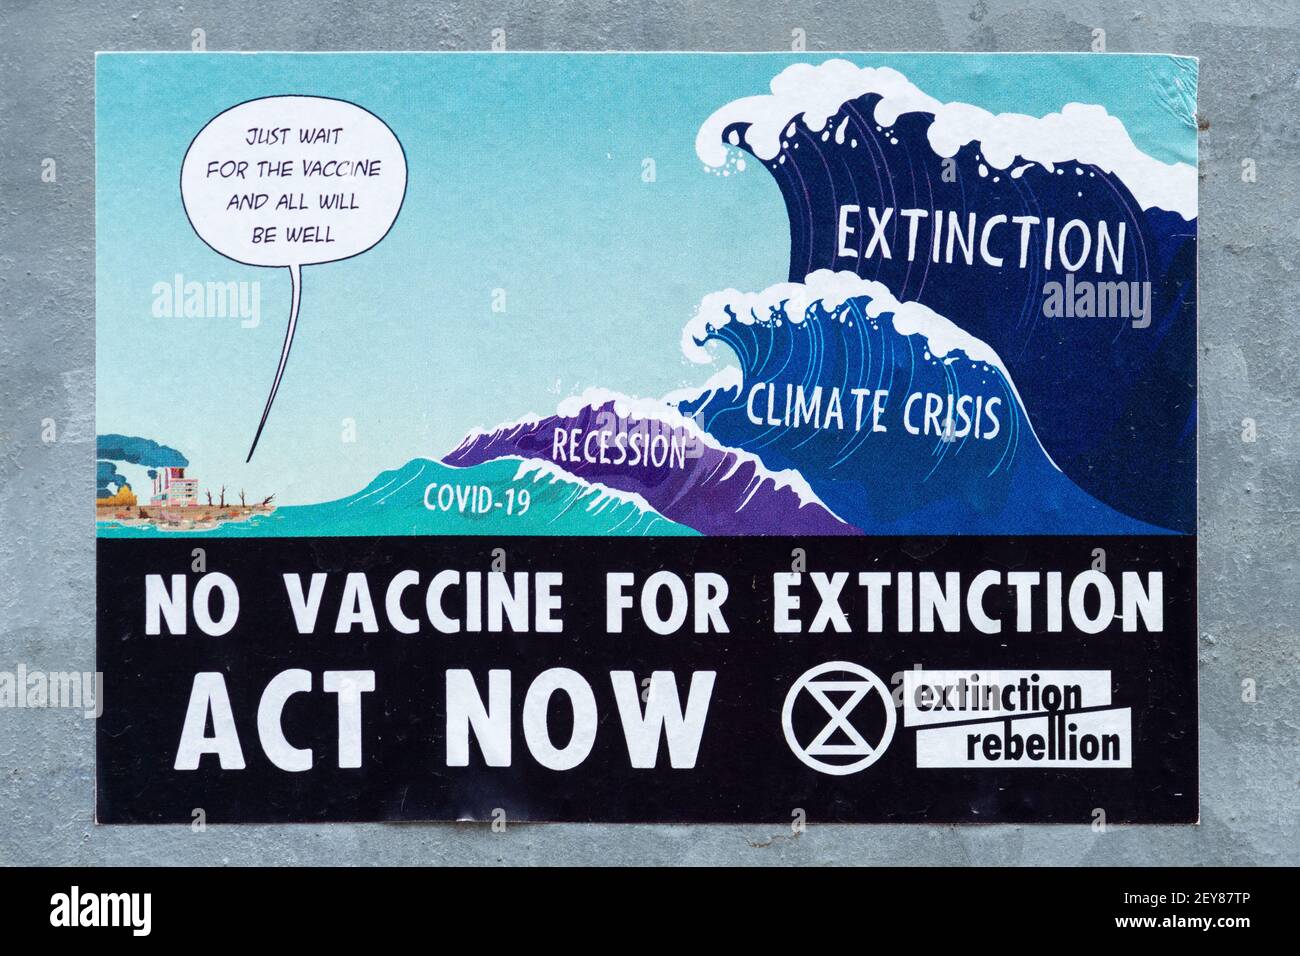 Extinction Rebellion sticker with logo and message No Vaccine for Extinction Act Now, UK Stock Photo